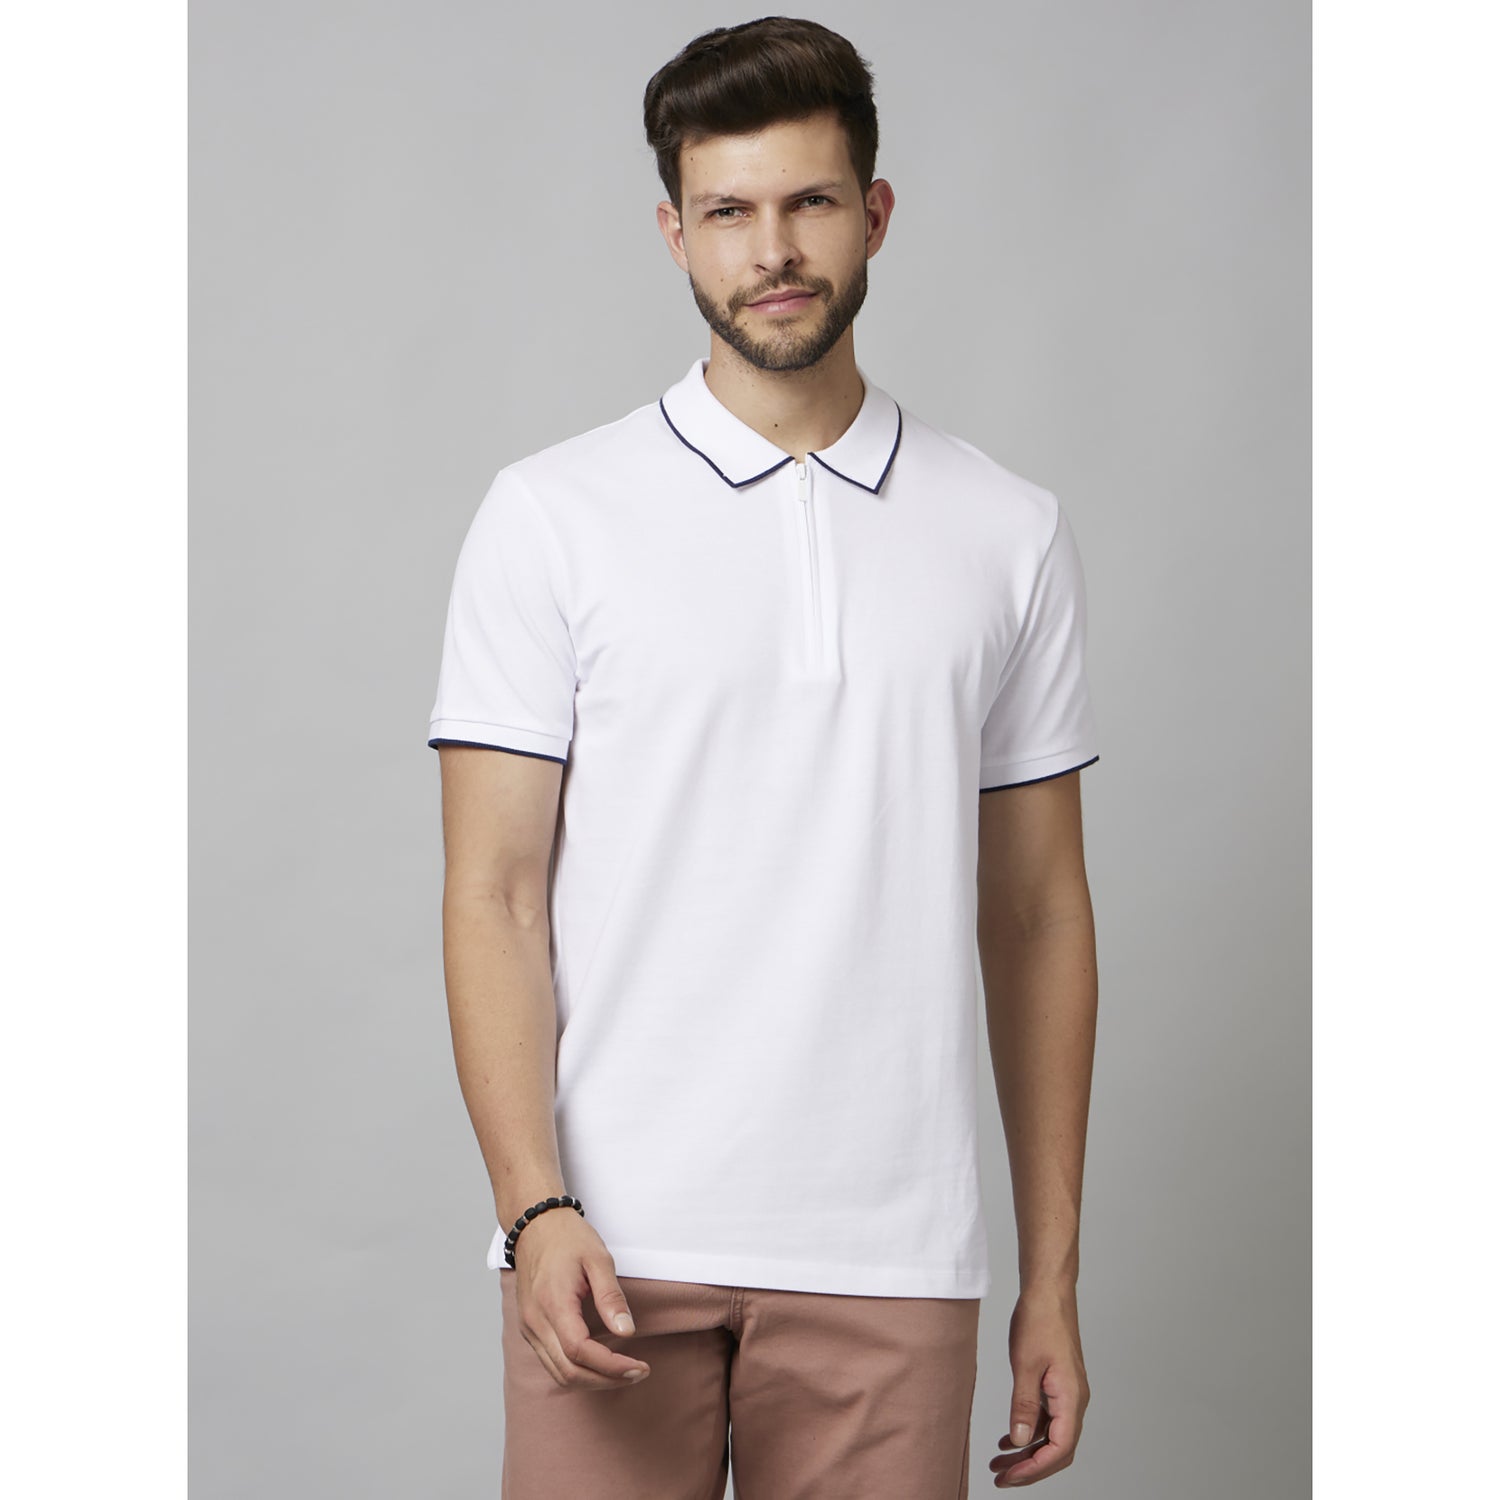 White Solid Half Sleeve Cotton T-Shirts (FEZIP1)